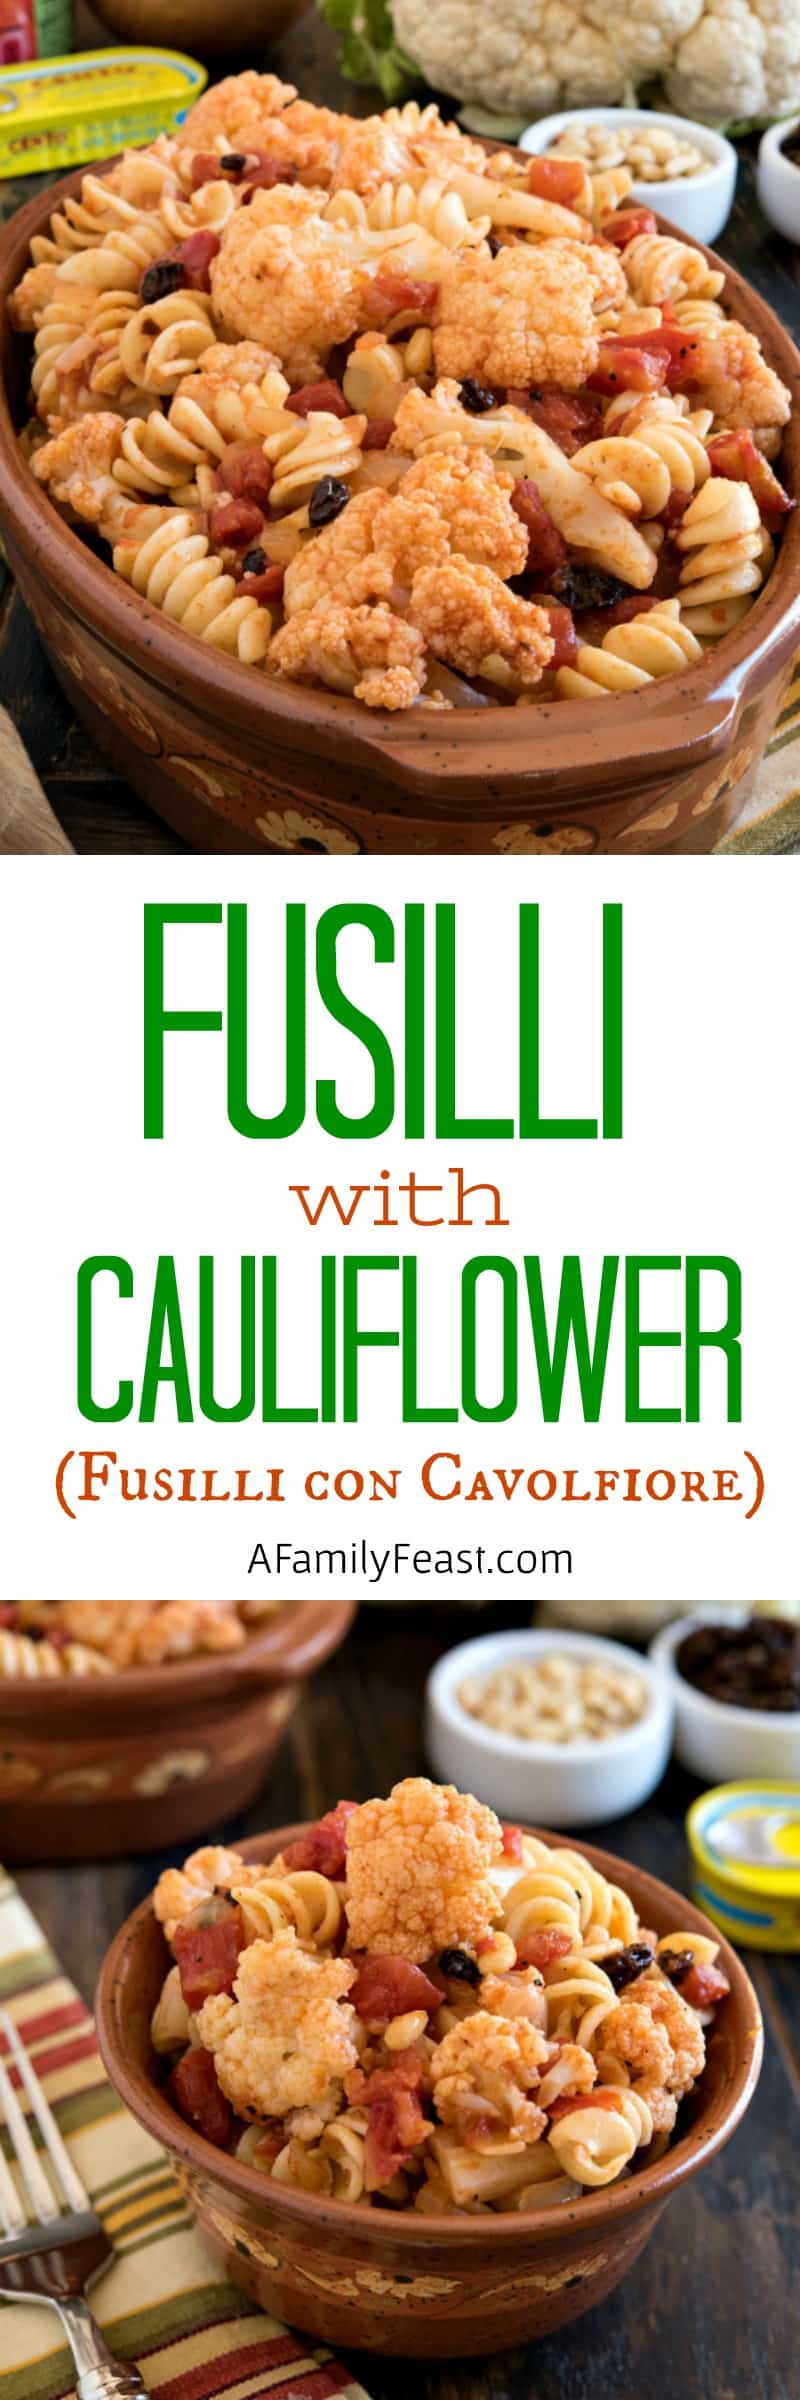 Fusilli with Cauliflower (Fusilli con Cavolfiore) is a classic Italian dish made with fresh cauliflower and pasta, plus a variety of flavorful ‘pantry’ ingredients. You’ll love this simple and delicious dish!